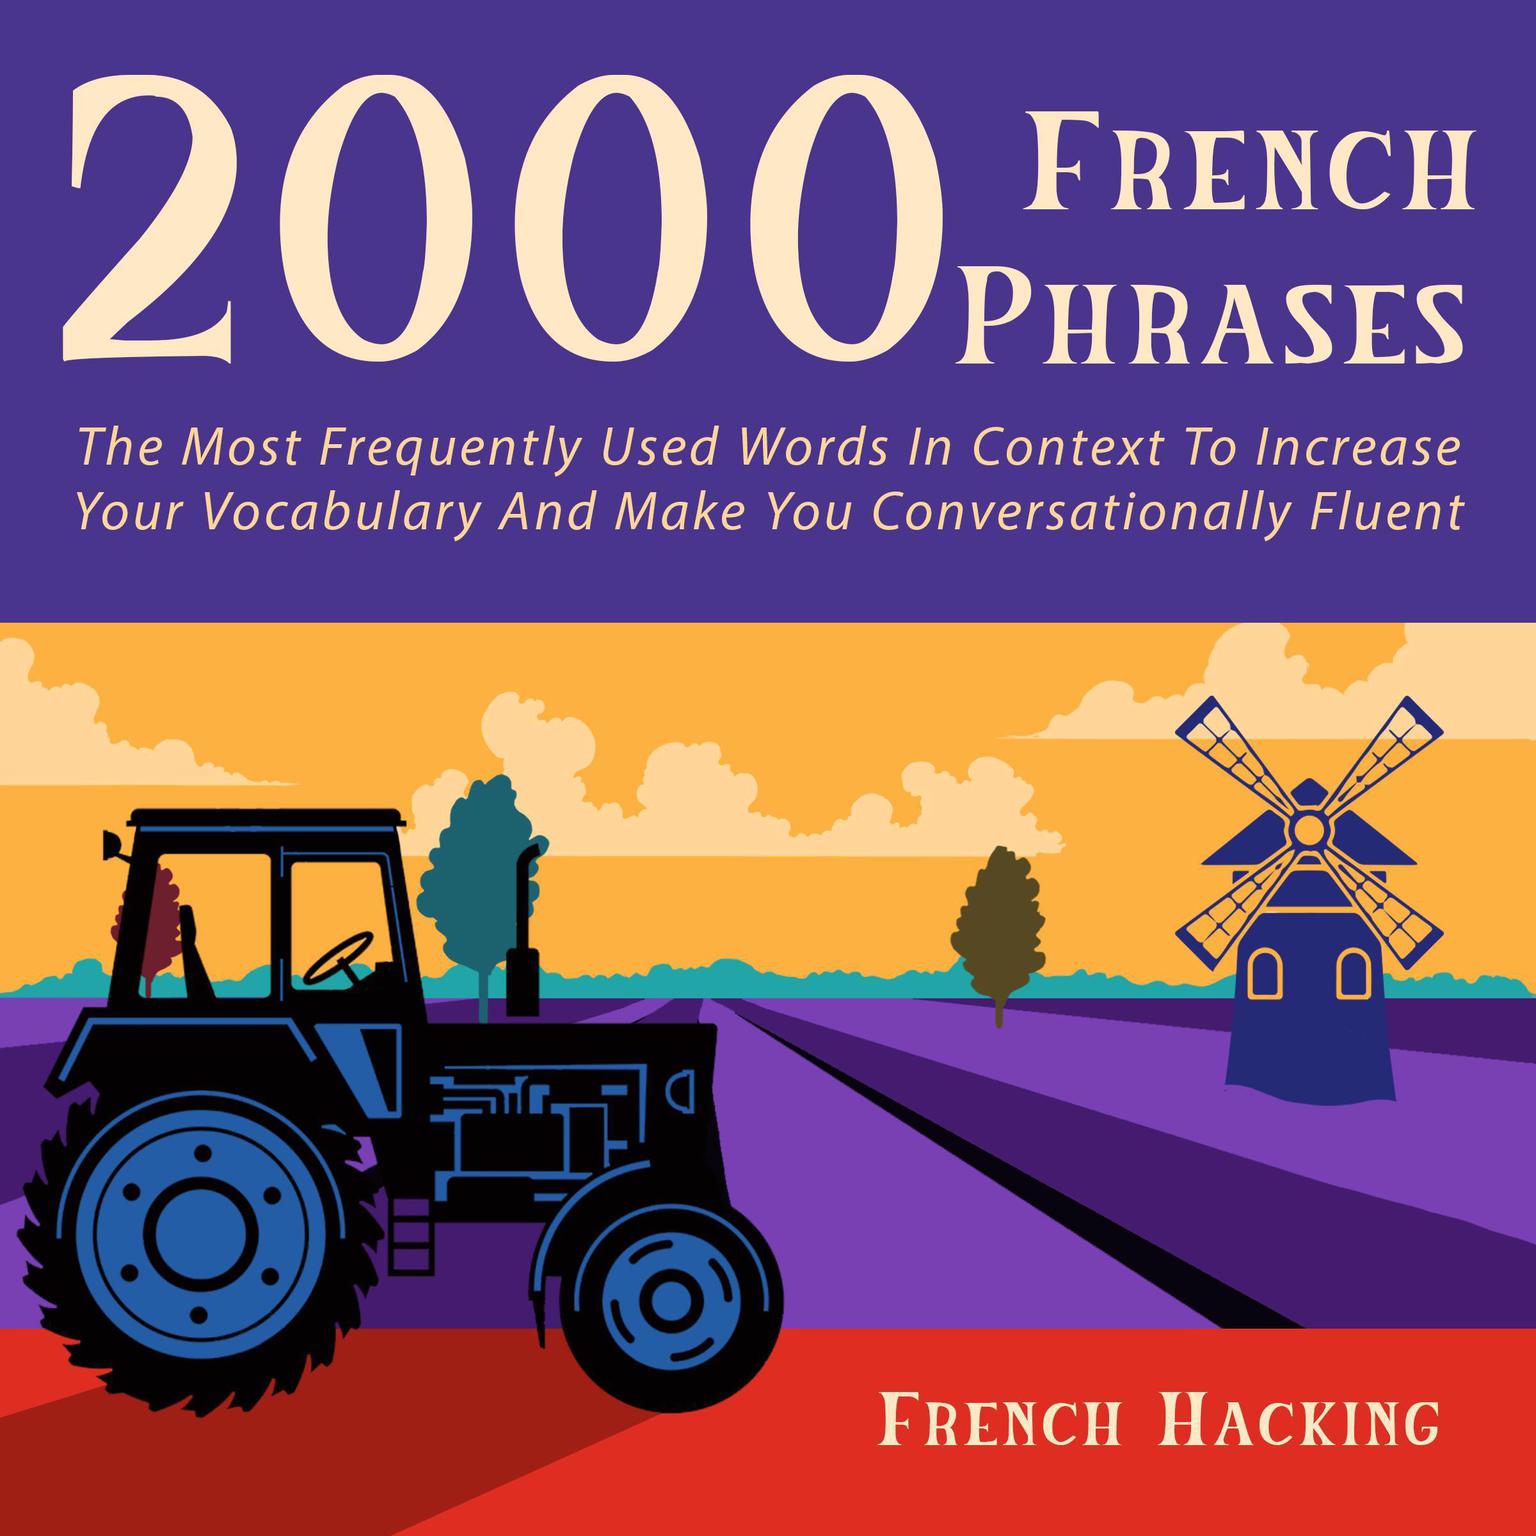 2000 French Phrases - The most frequently used words in context to increase your vocabulary and make you conversationally fluent Audiobook, by French Hacking